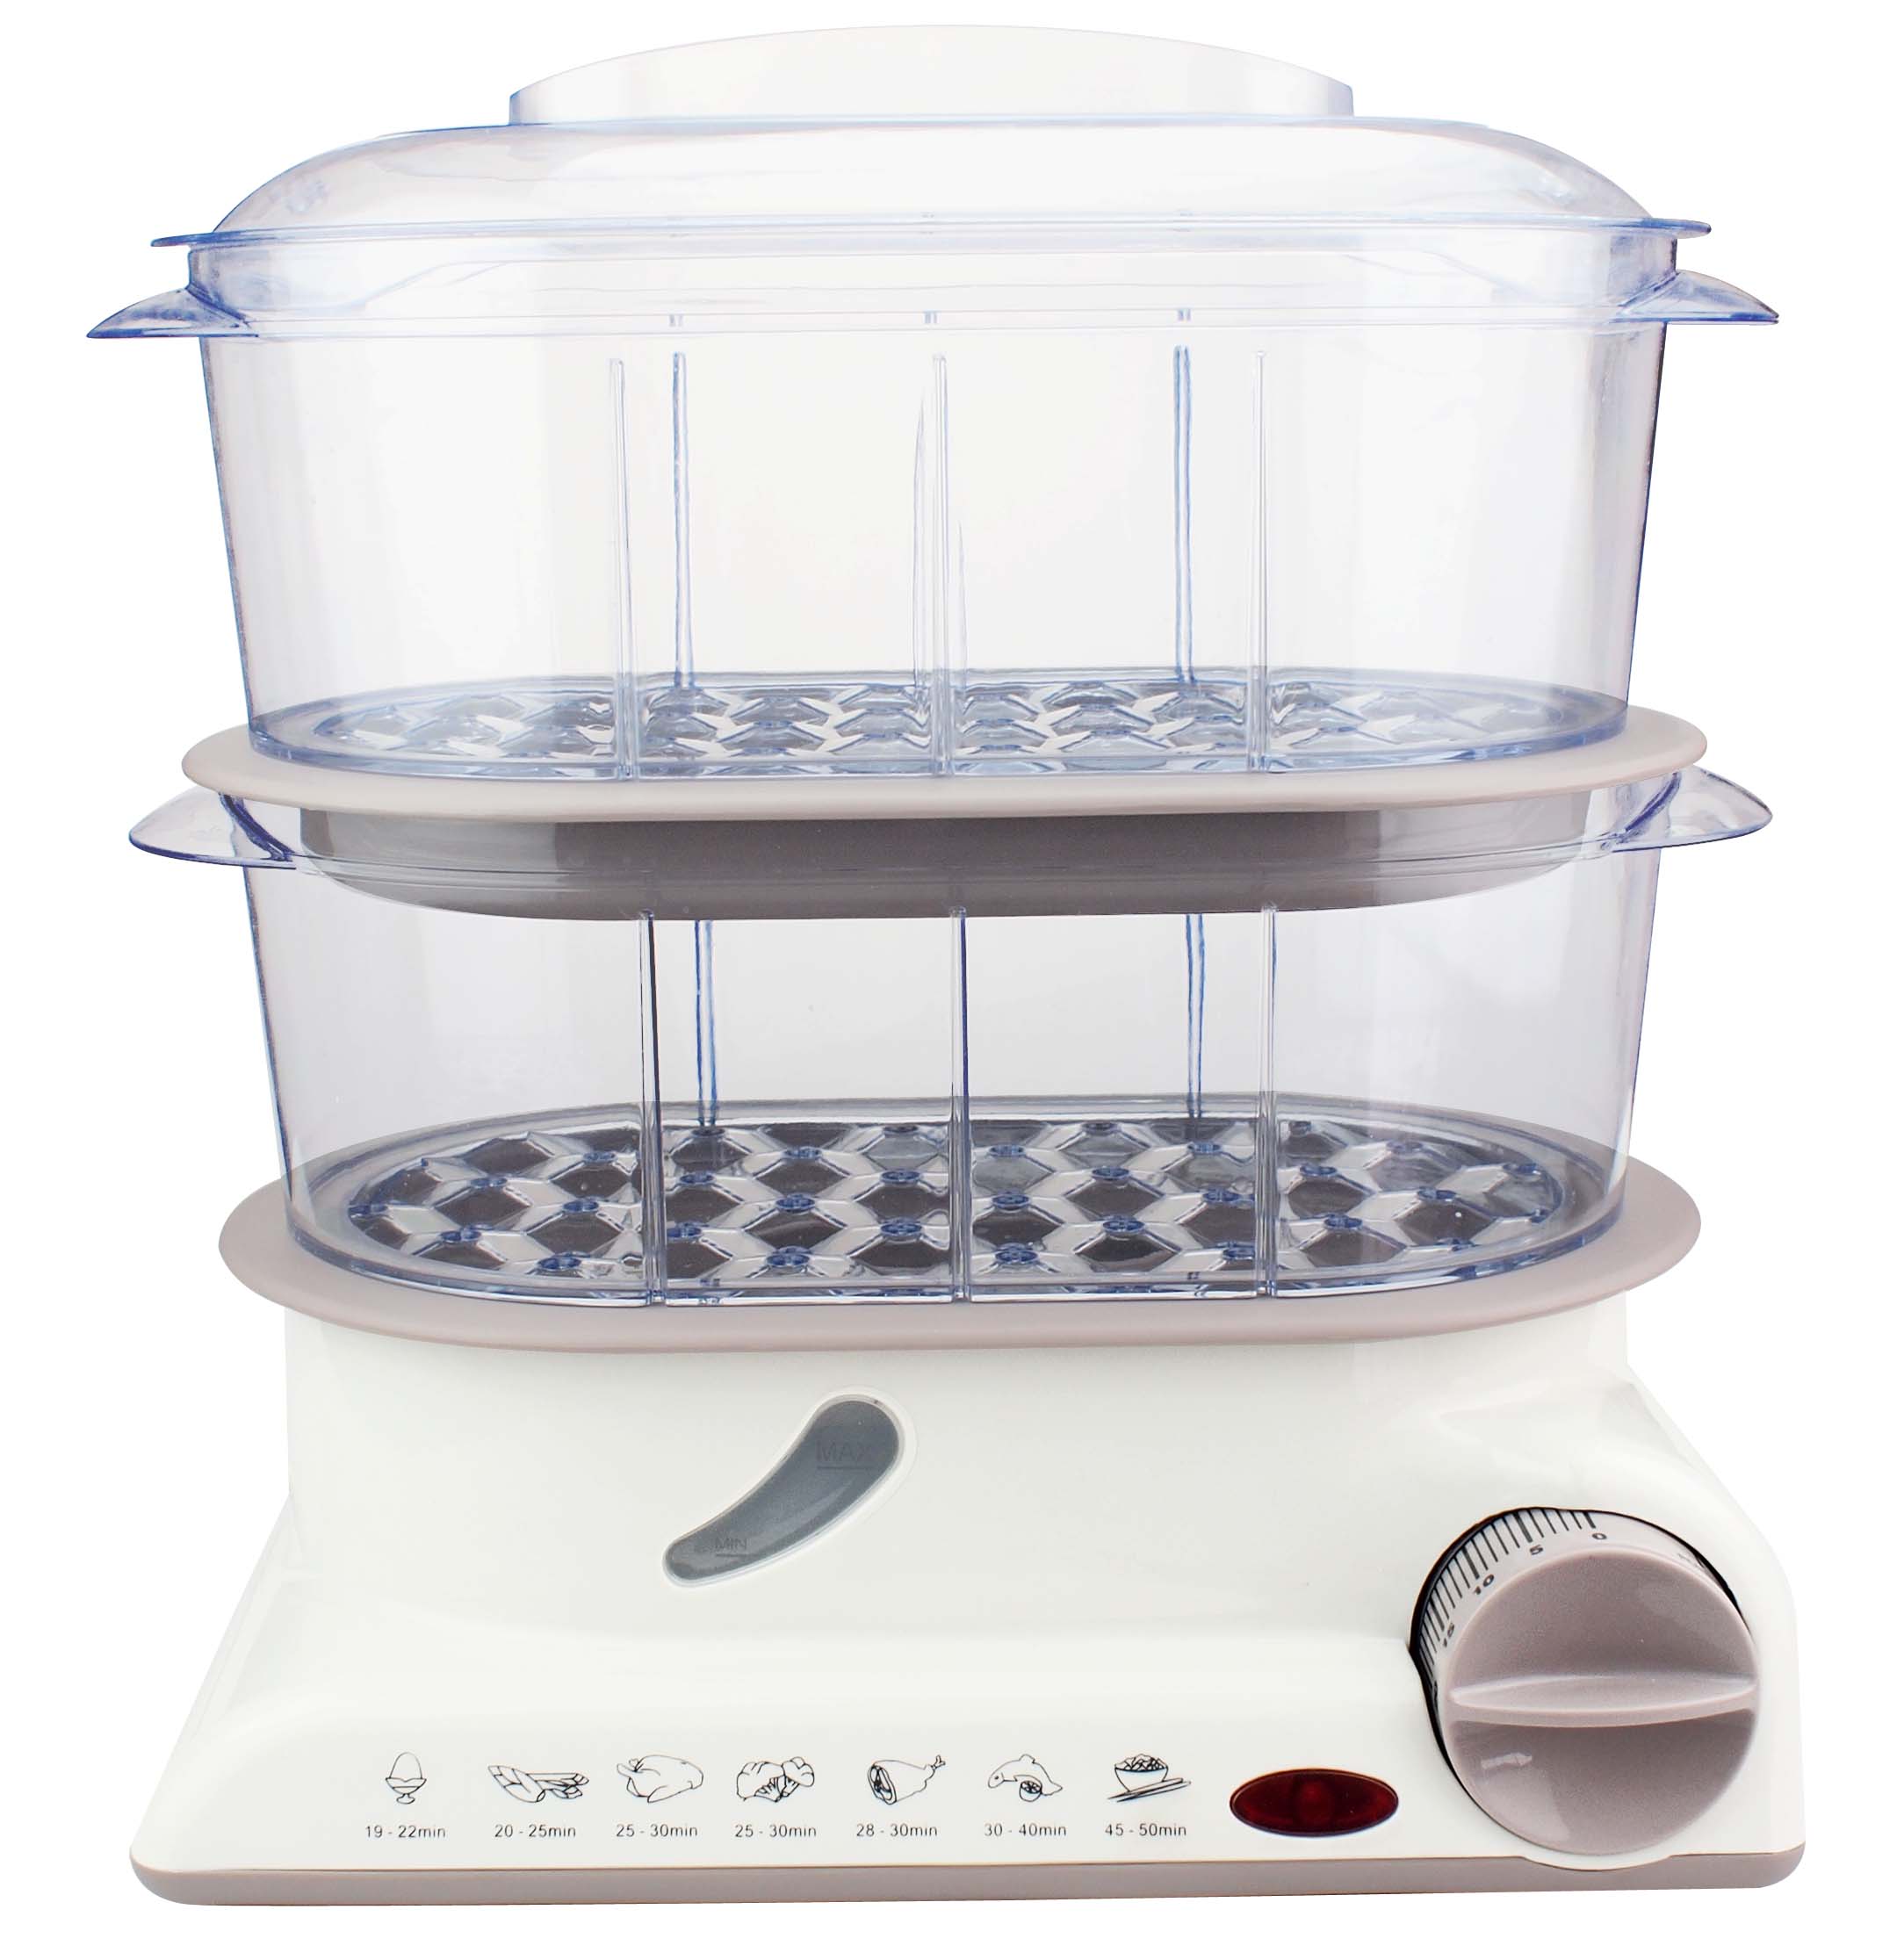  of food steamer tiered steamer sets tiered food steamers cook a